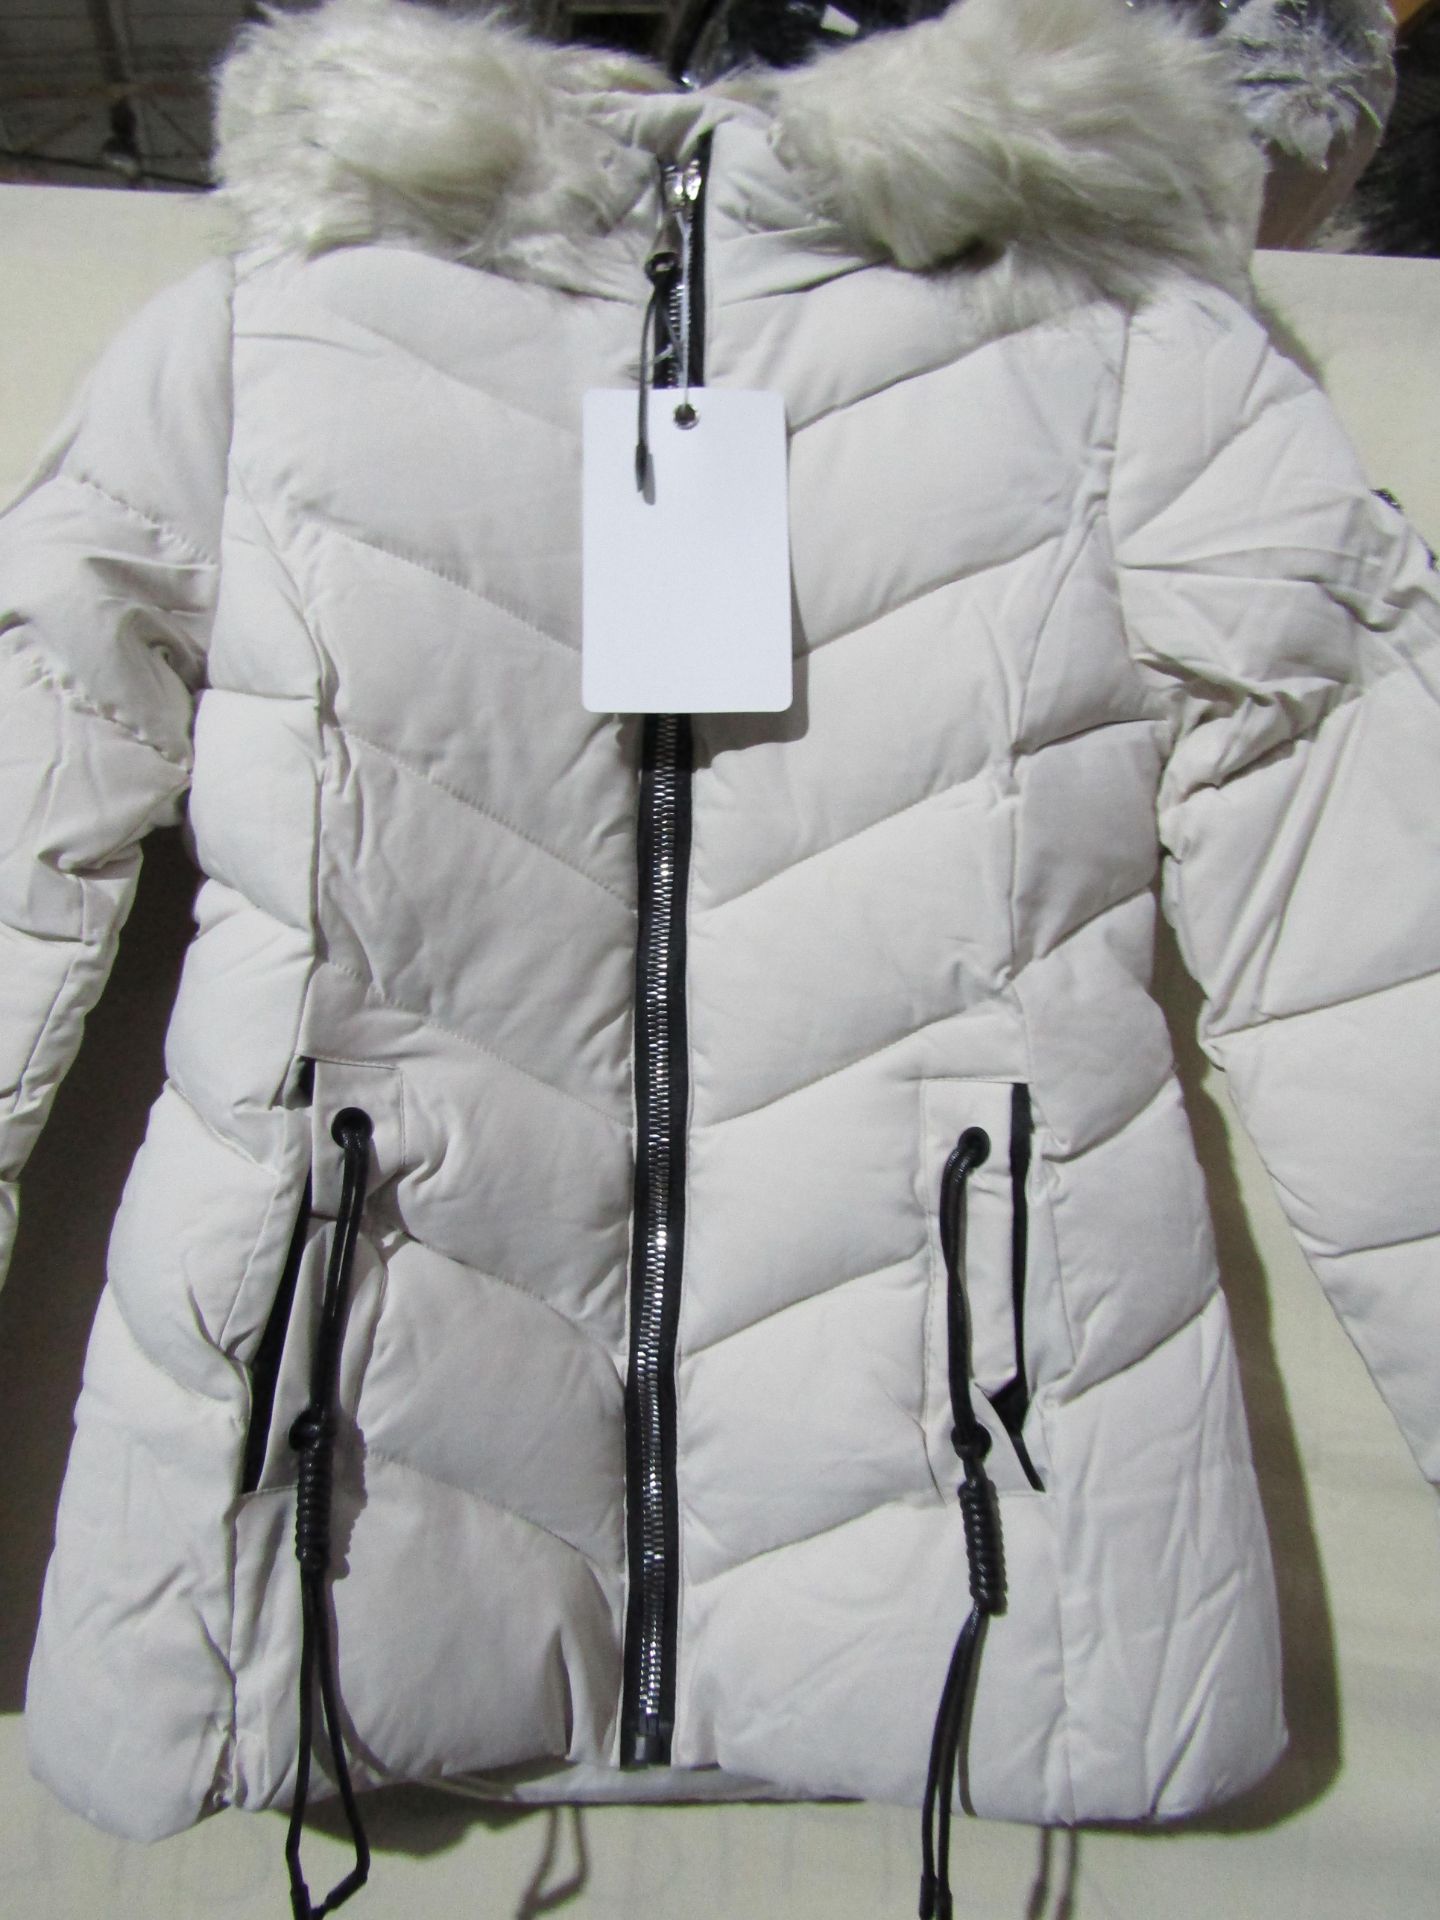 Monte Cervino Padded Jacket With Hood Cream Size L New & Packaged ( Please Note These Coats Are EU